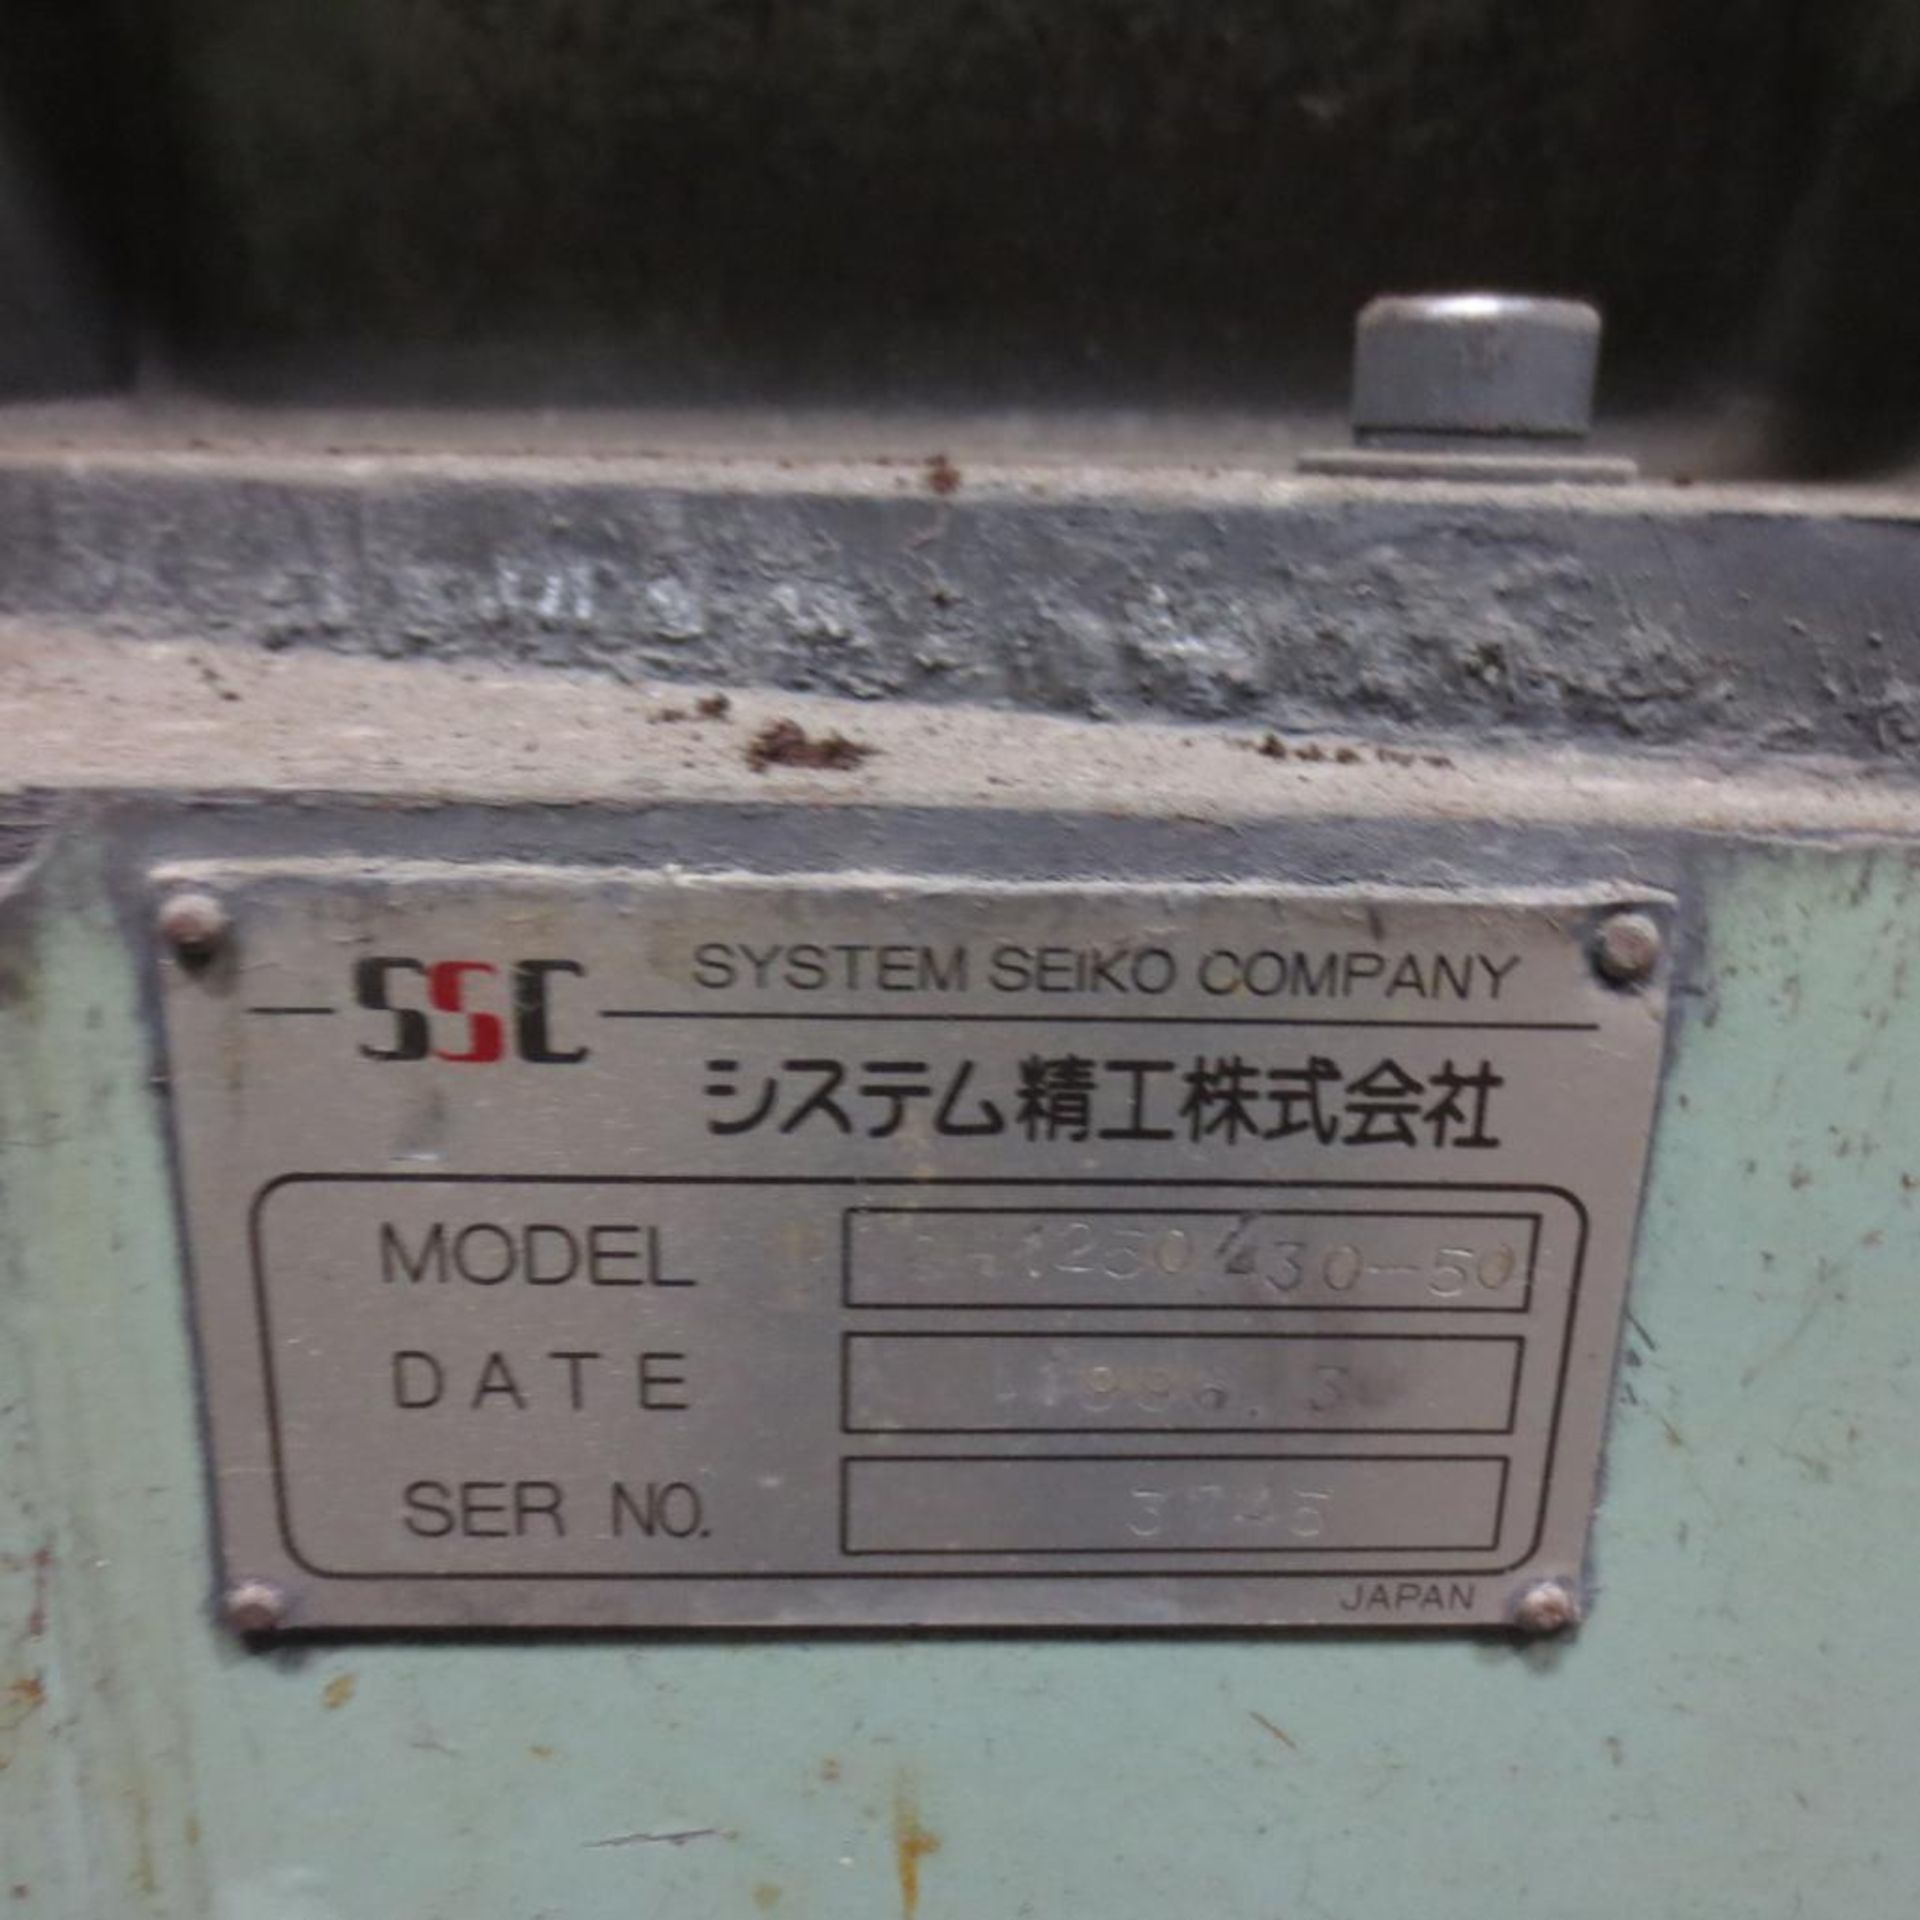 SSC System Seiko Vertical Lapping Machine S/N: 3745 (1996) CNC Control. Loading Fee is $850.00 - Image 2 of 8